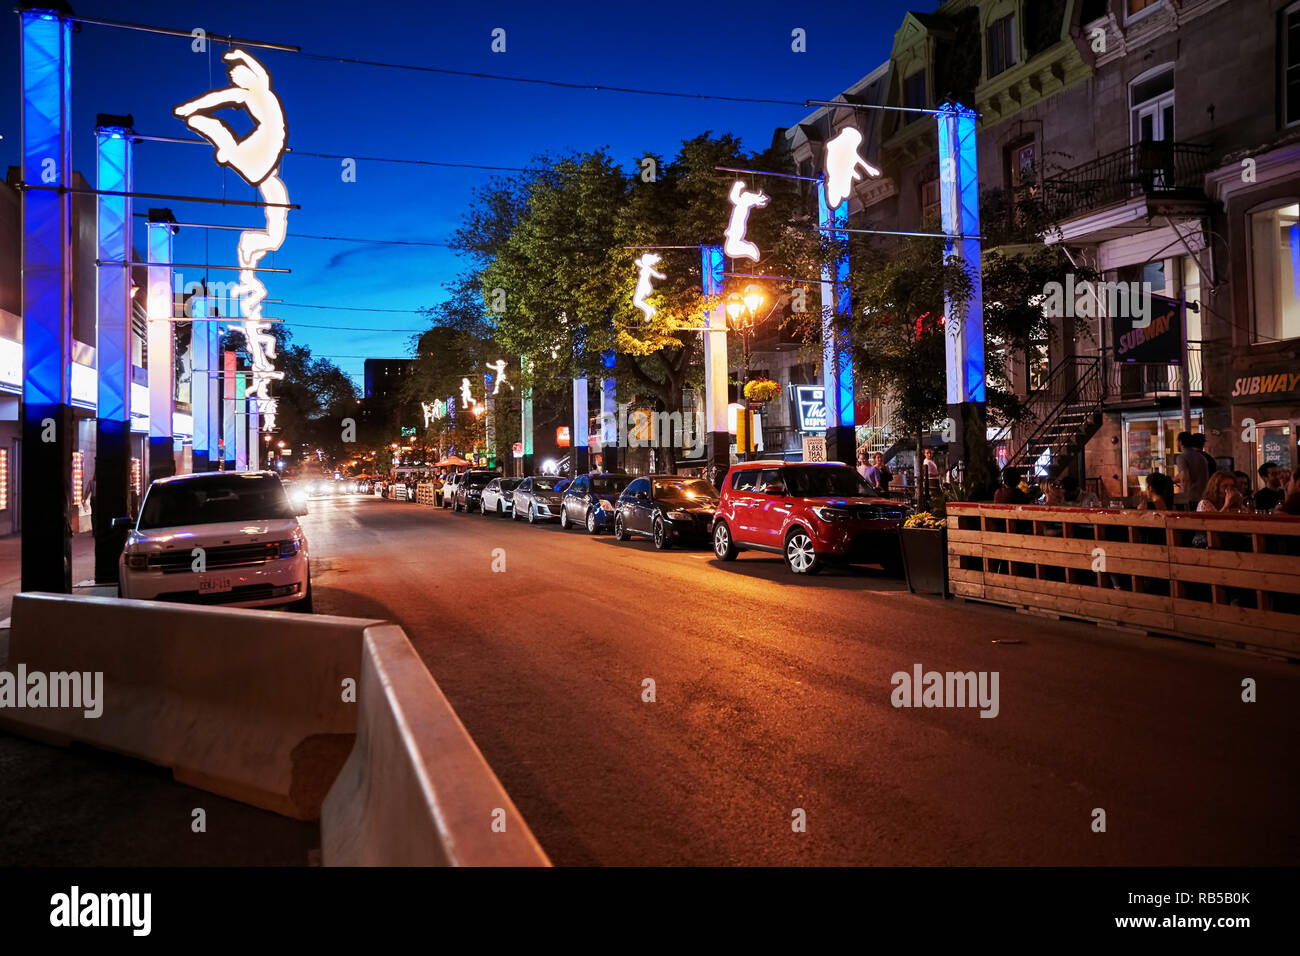 Saint denis street (rue st. denis) at night. Famous landmark called as the heart of Montreal in Quebec, Canada. Stock Photo